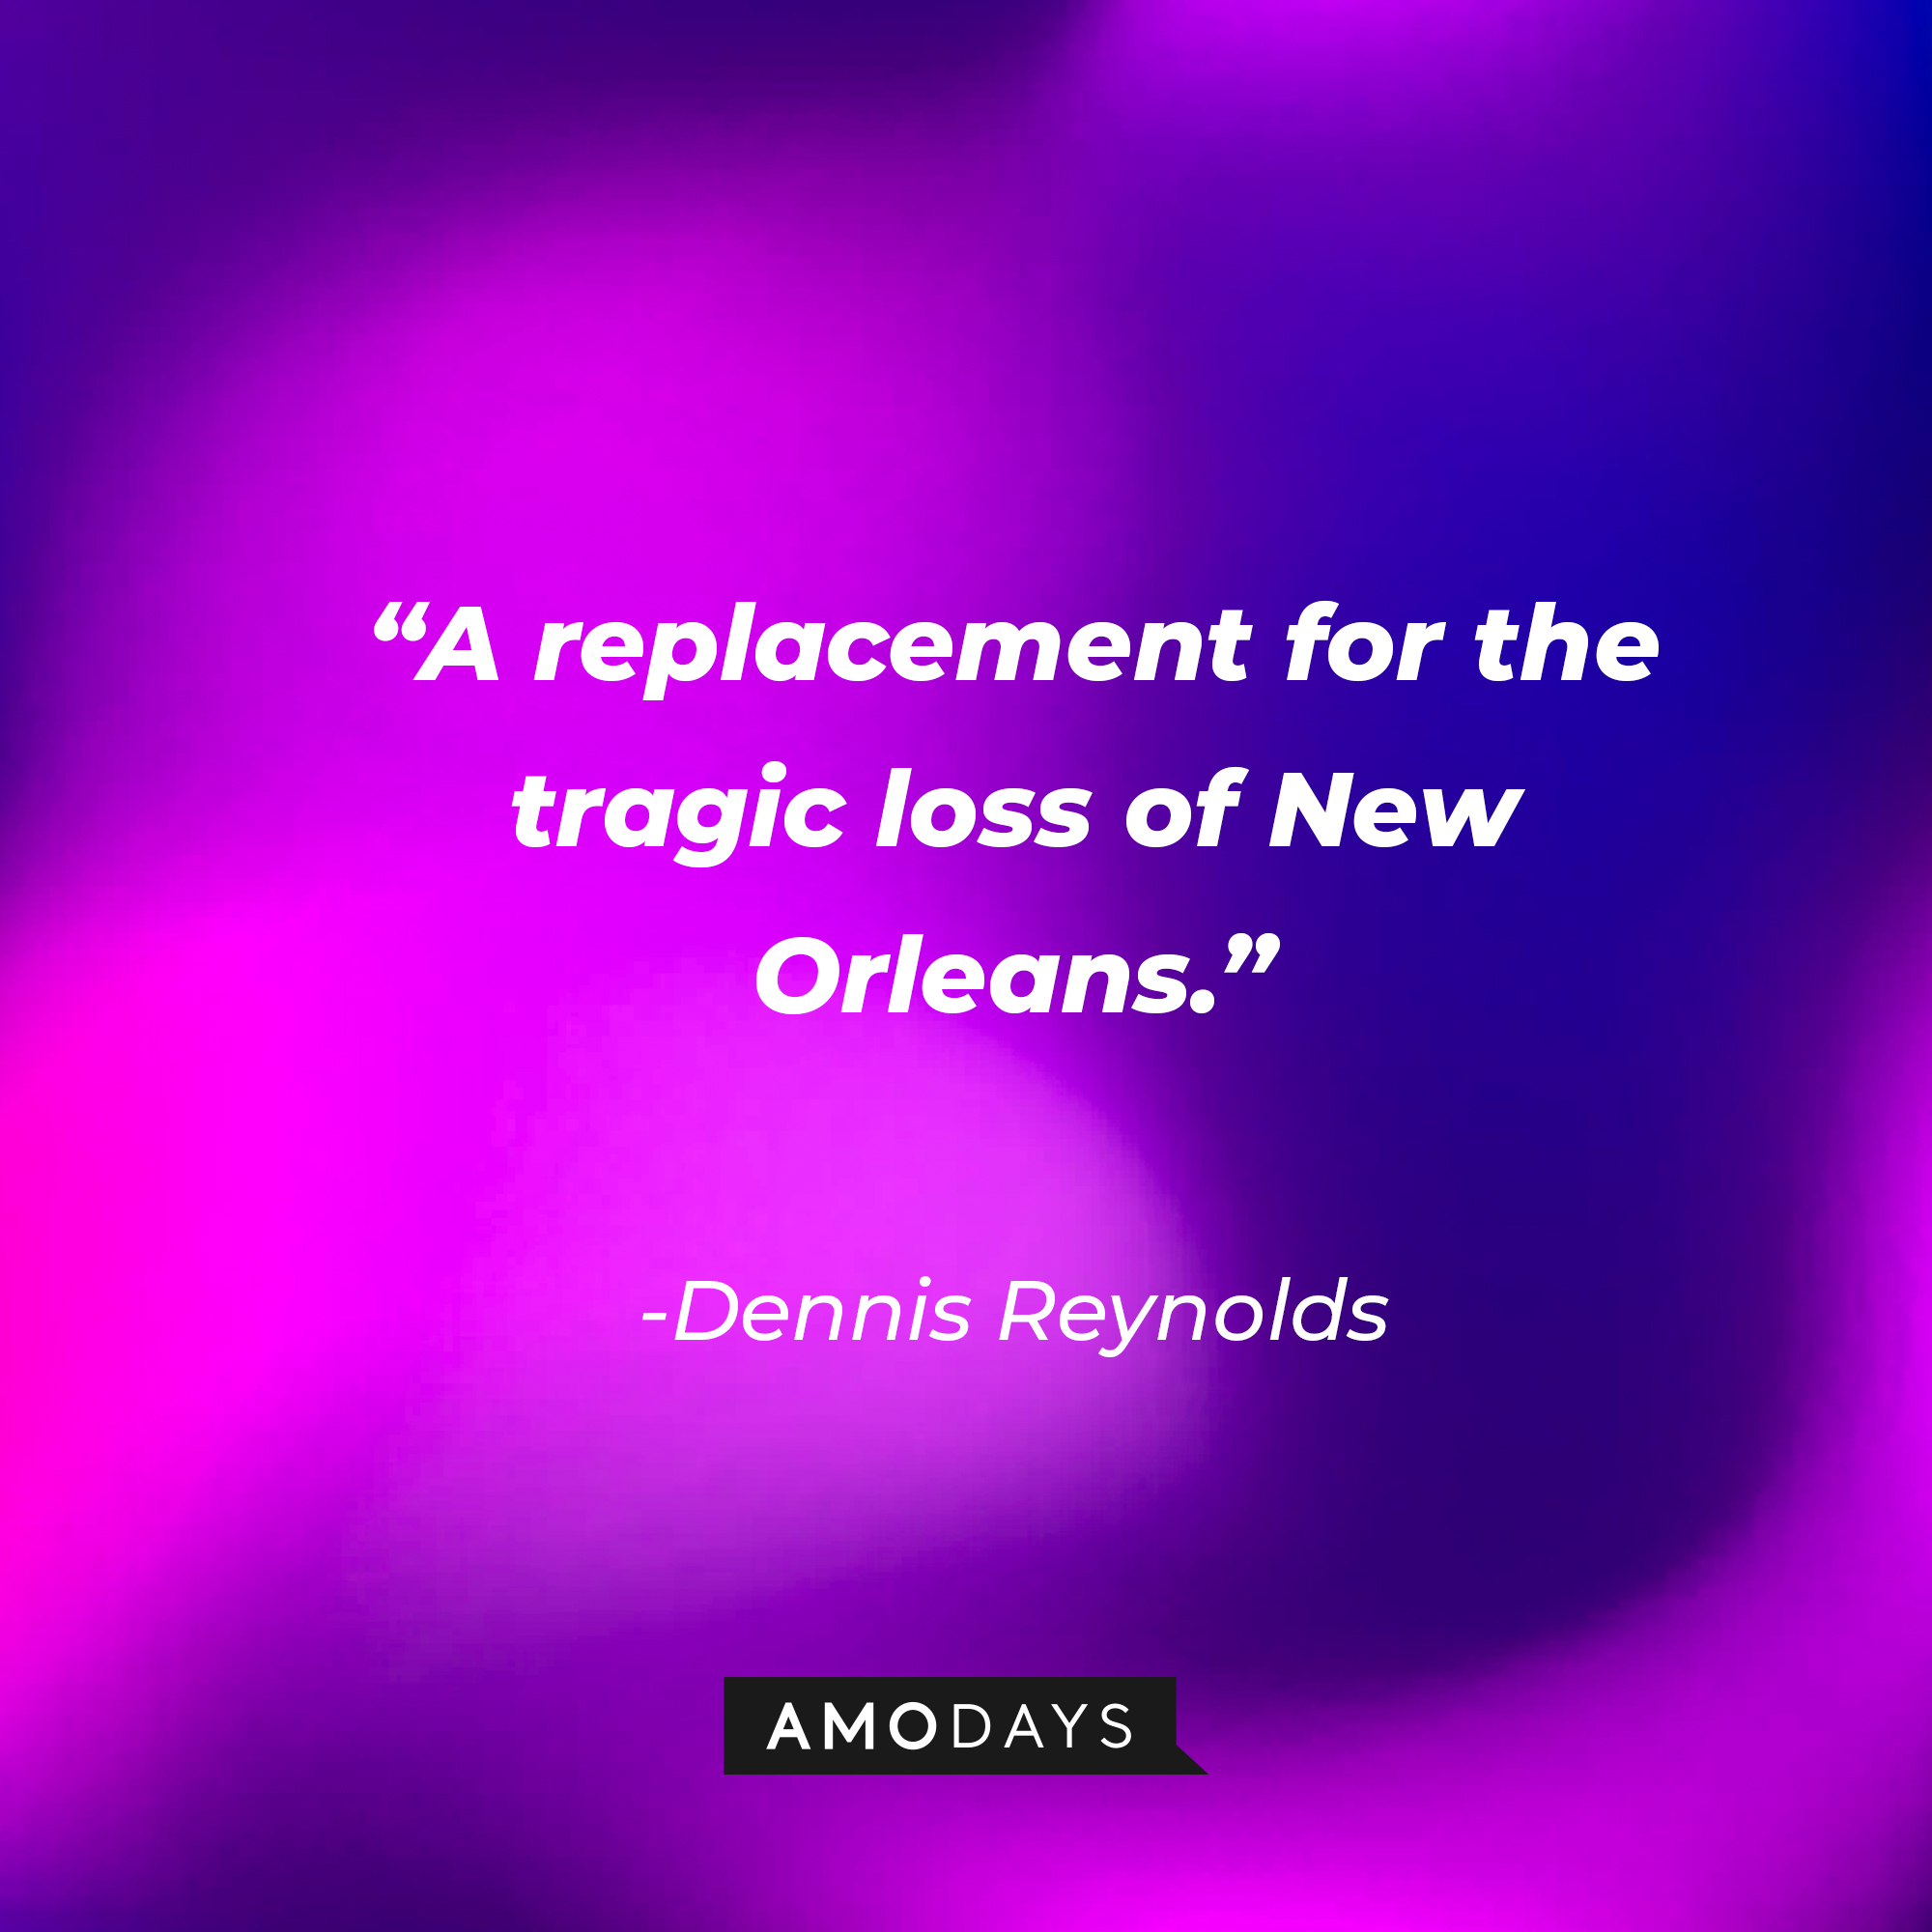 Dennis Reynolds’ quote:  “A replacement for the tragic loss of New Orleans.” | Source: AmoDays